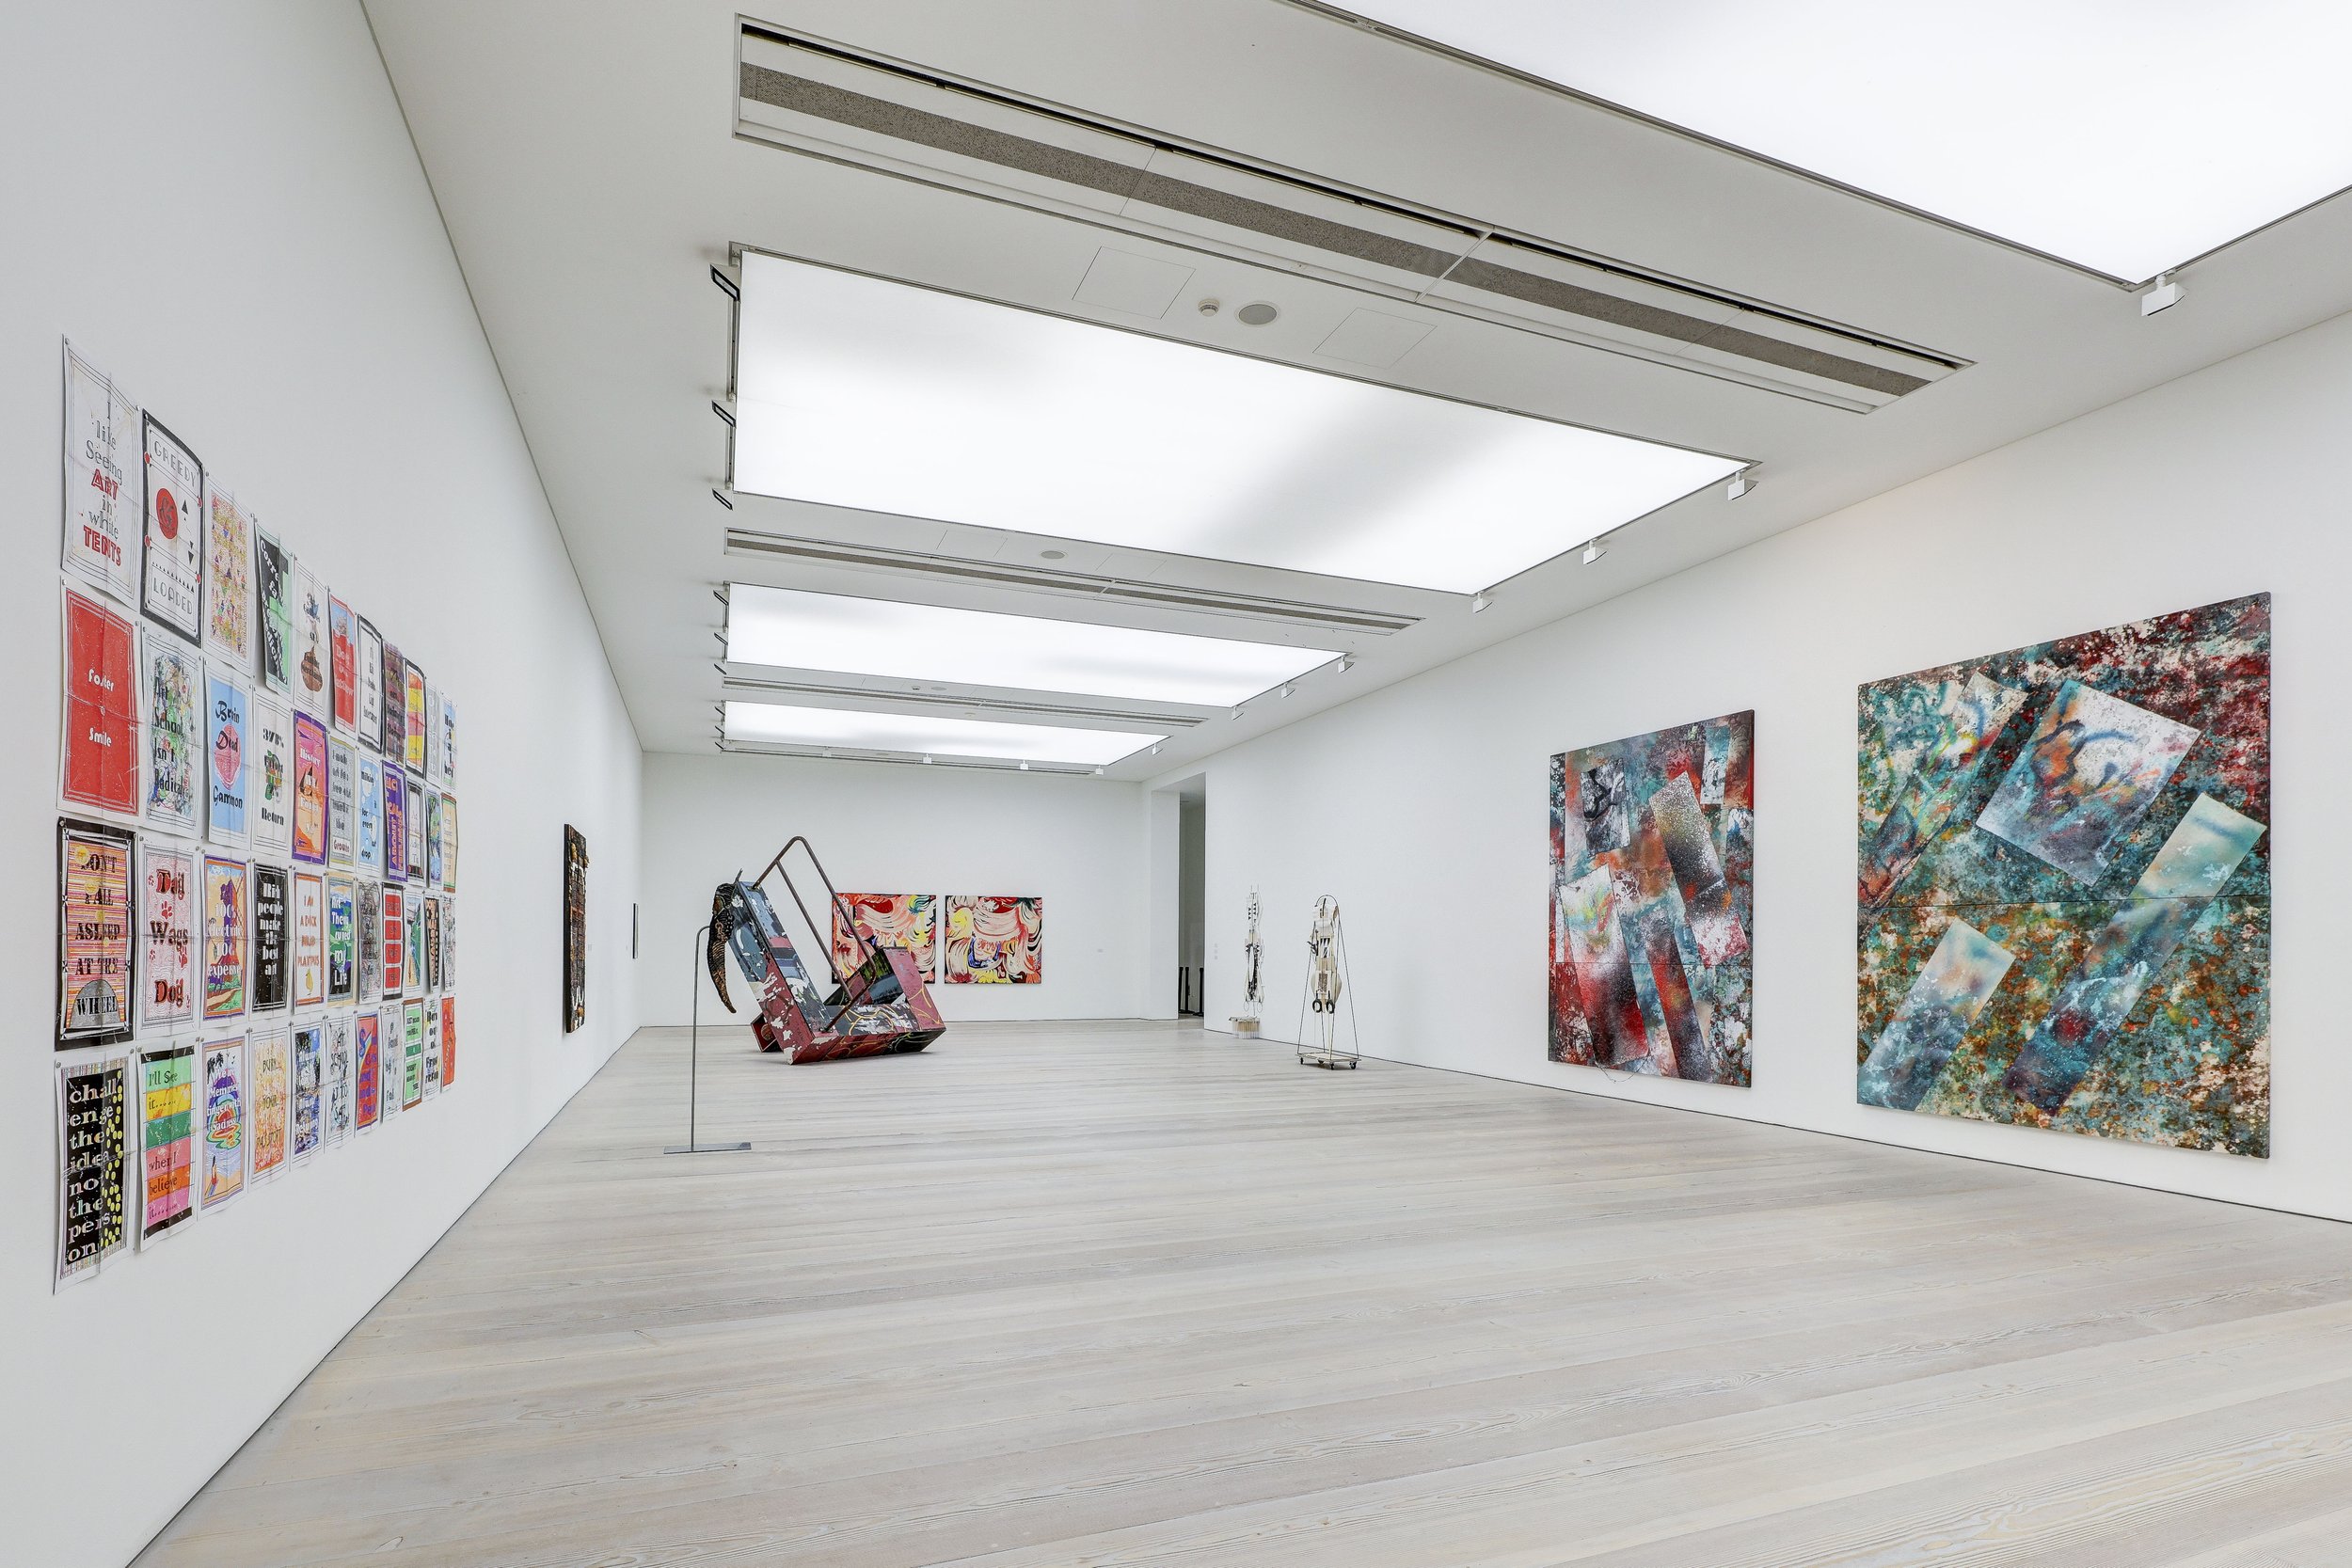  Installation view of the  Studio Response 4  group presentation  Gallery 4, Saatchi Gallery, London 2023  Show runs until 11th February 2024 